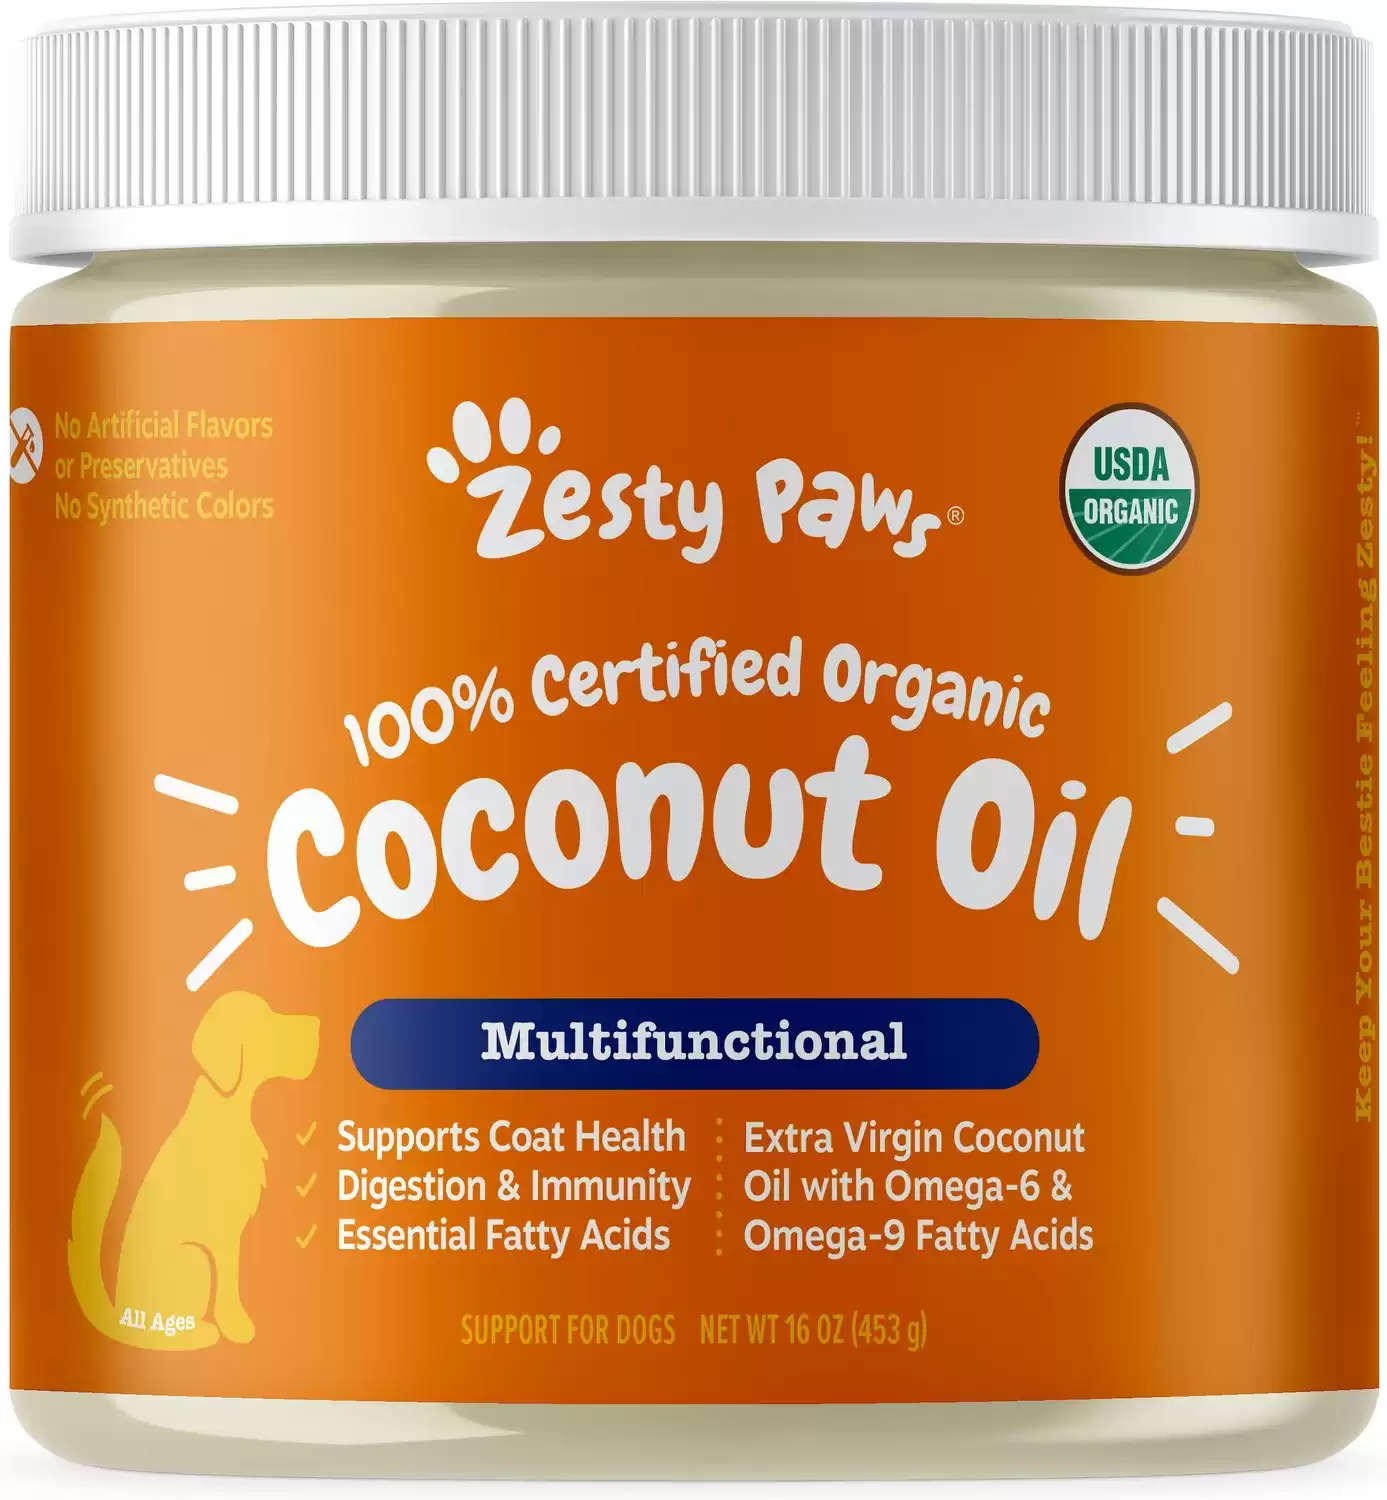 Zesty Paws Coconut Oil Coconut Flavored Liquid Skin & Coat Supplement for Dogs